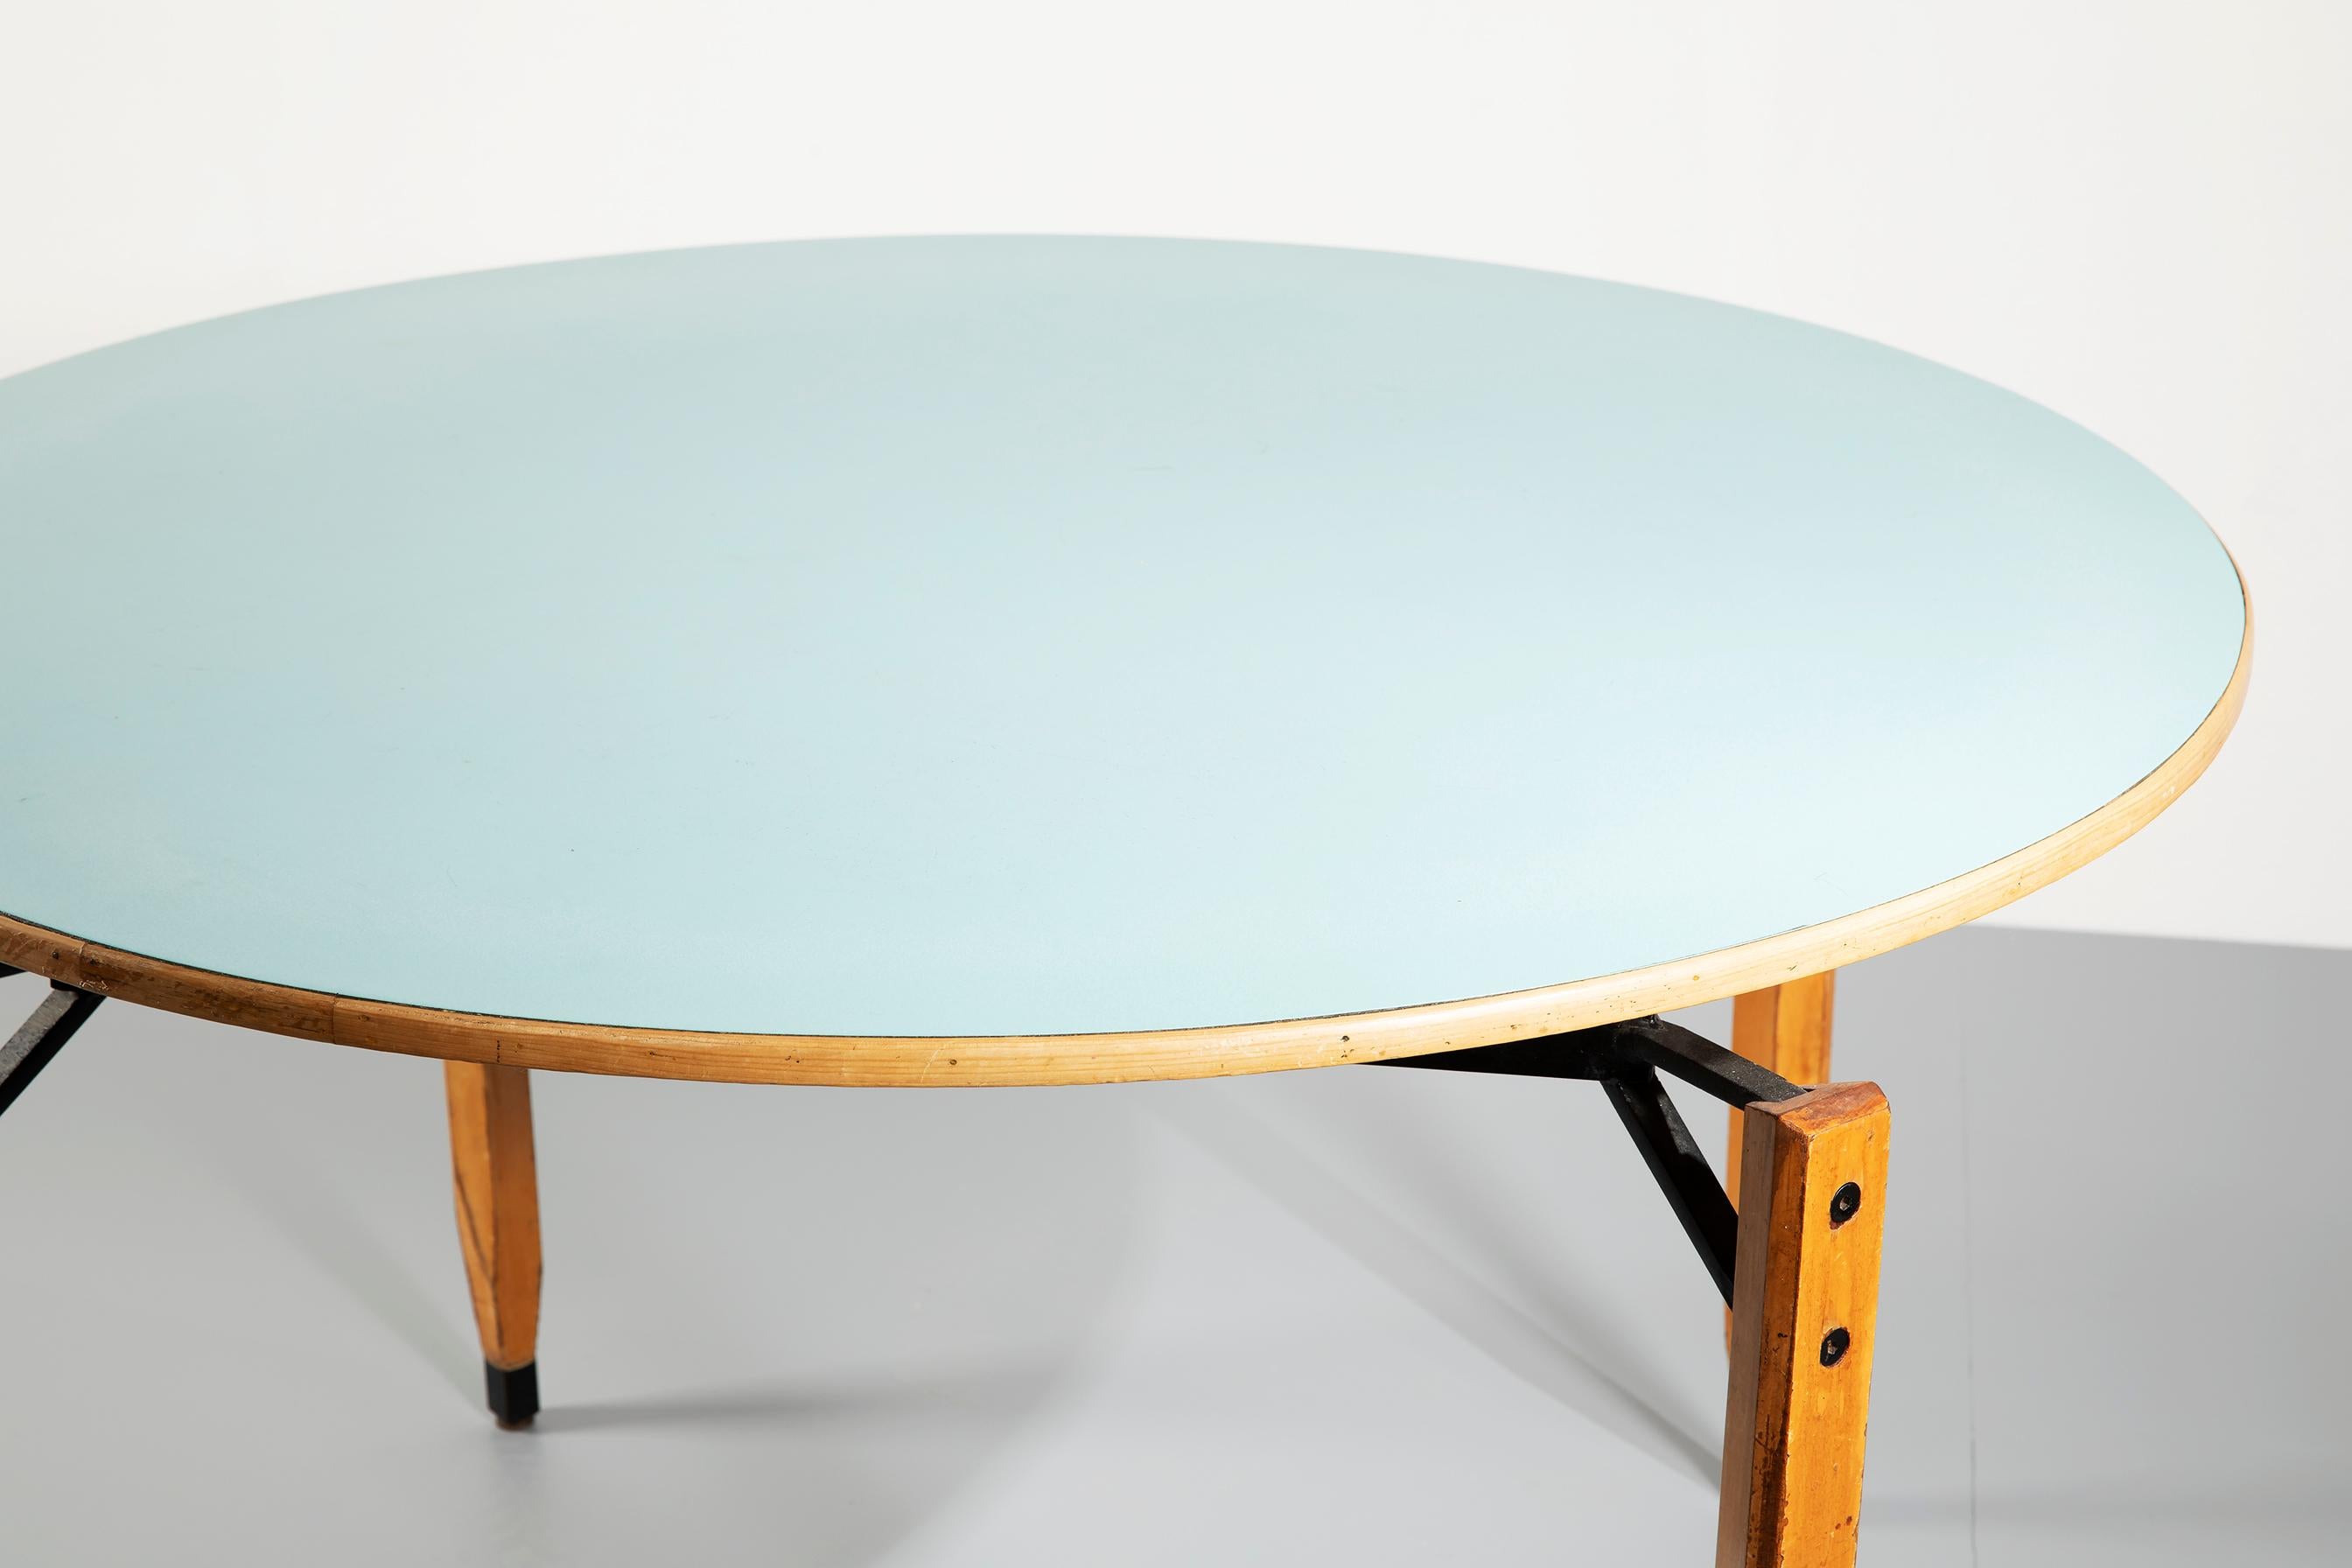 Roberto Aloi Oakwood and Light Blue Plastic Italian Round Dining Table, 1950s For Sale 2